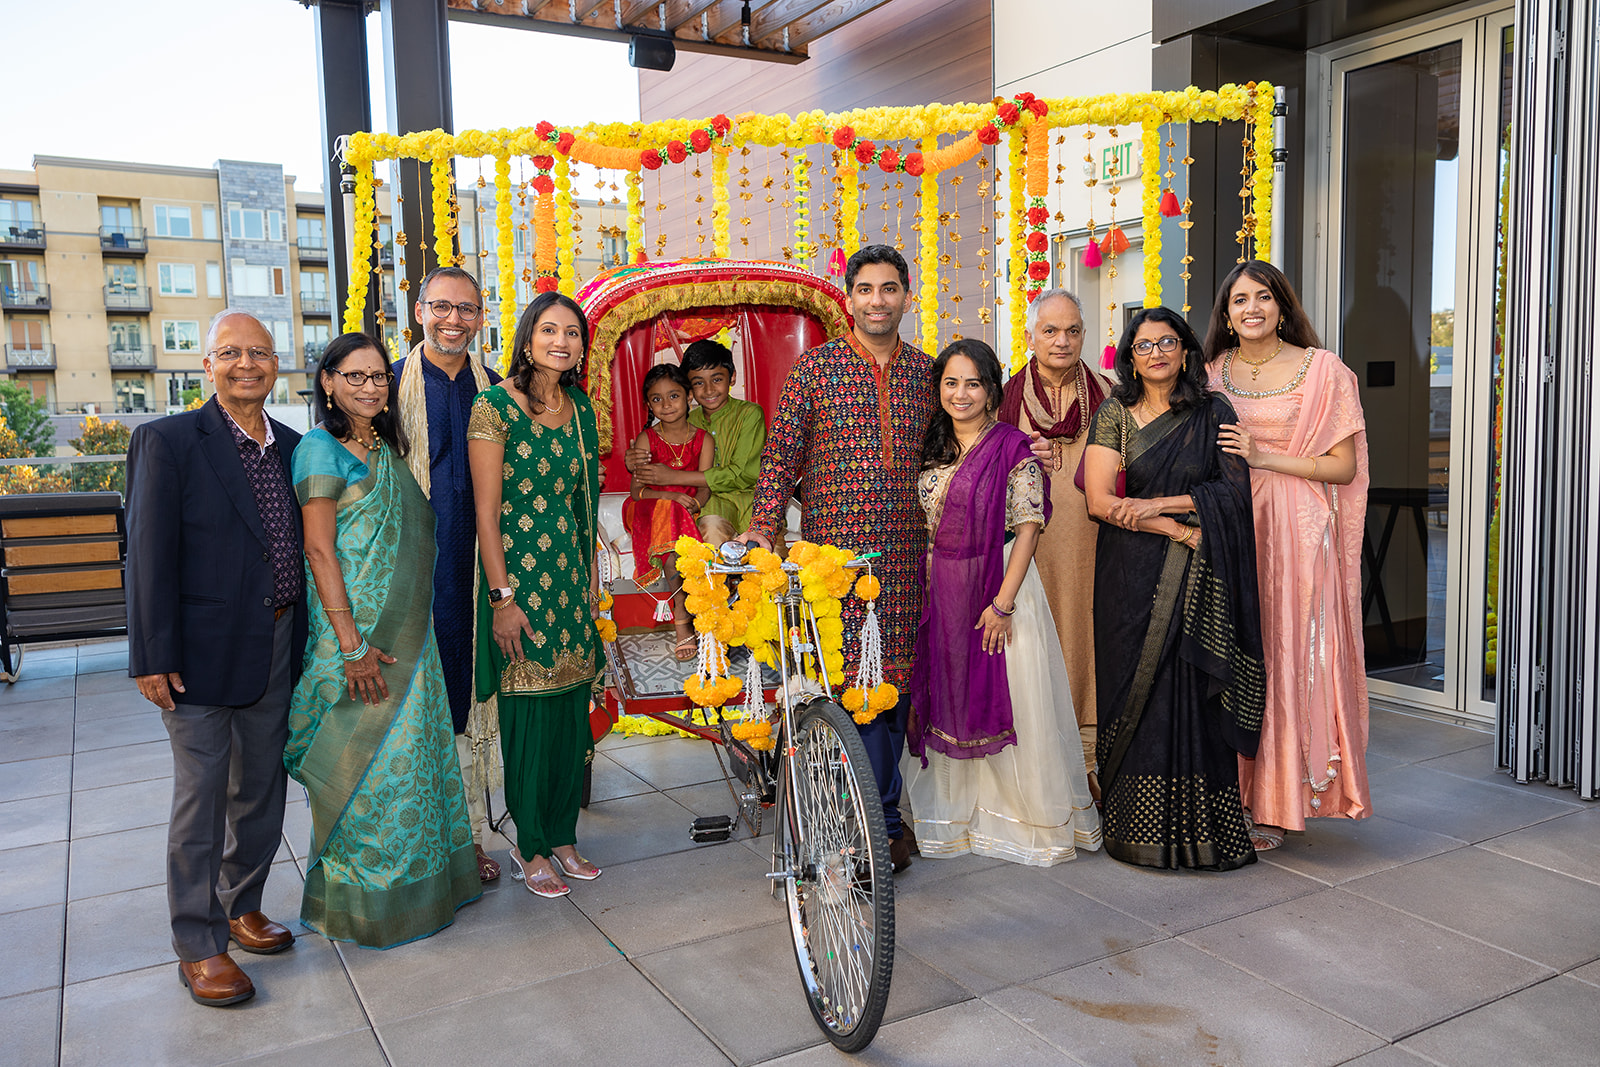 Family photo with Indian bike taxi set up at Hyatt Centric Hotel for an Indian Wedding Sangreet ceremony.